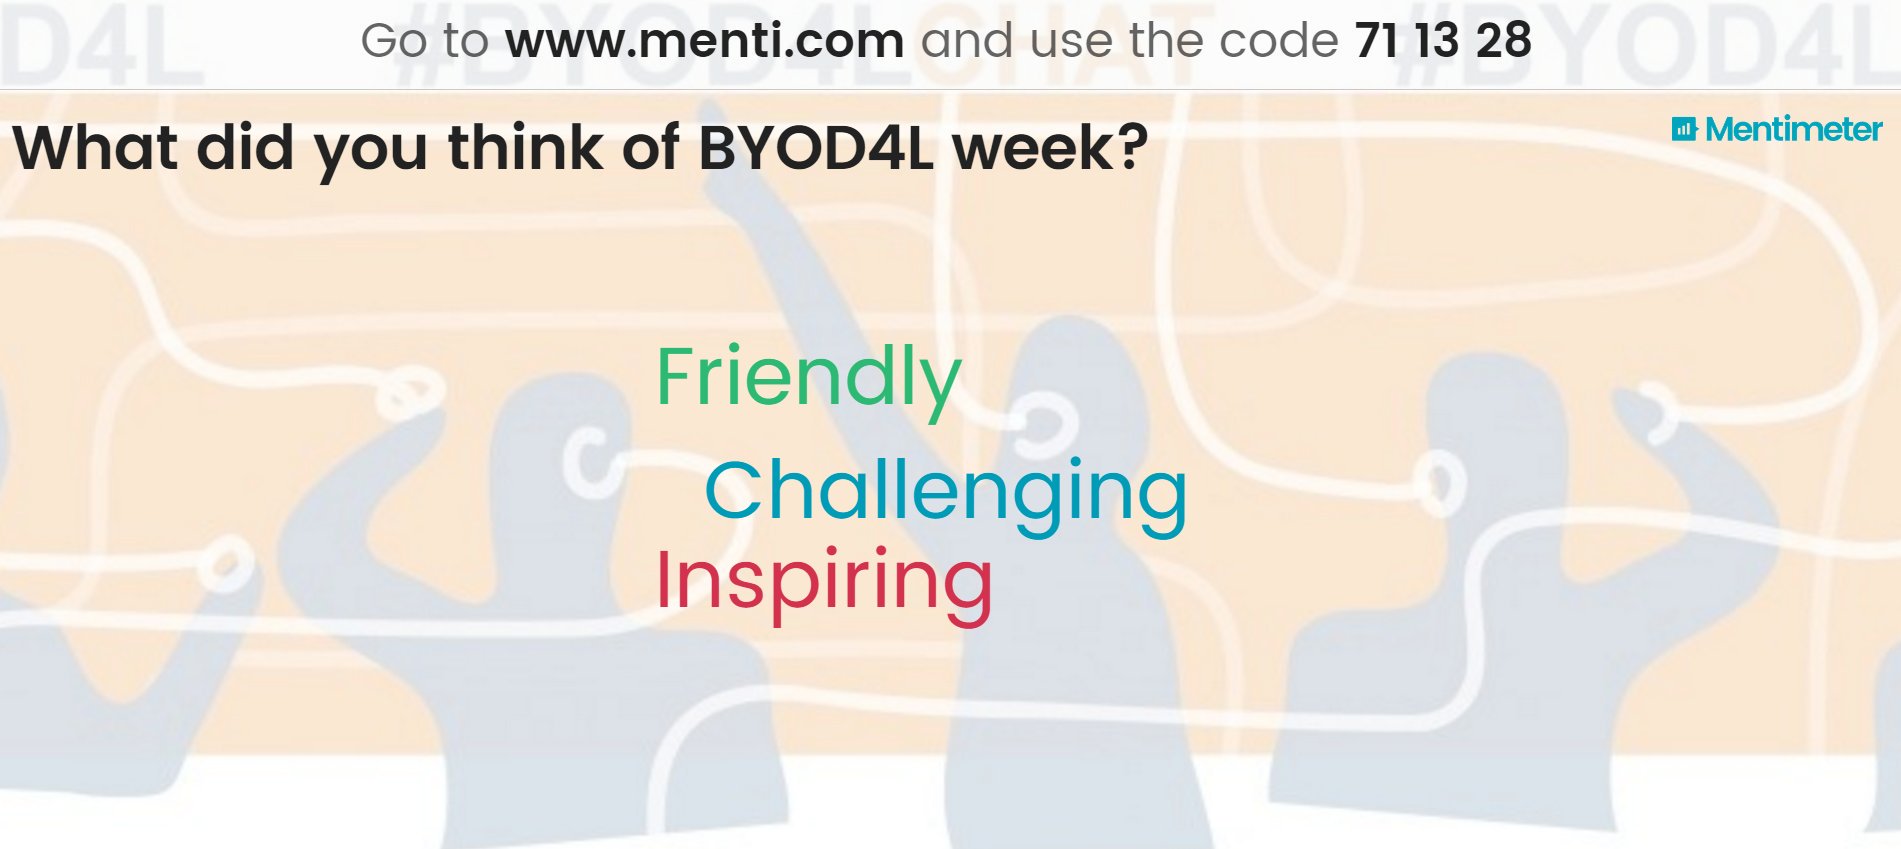 What 3 words would you use to describe #BYOD4L #BYOD4Lchat week? Share here https://t.co/iwaqJ7TvnM Live results: https://t.co/BMXcIPZ1sk https://t.co/ofUQkftsn0